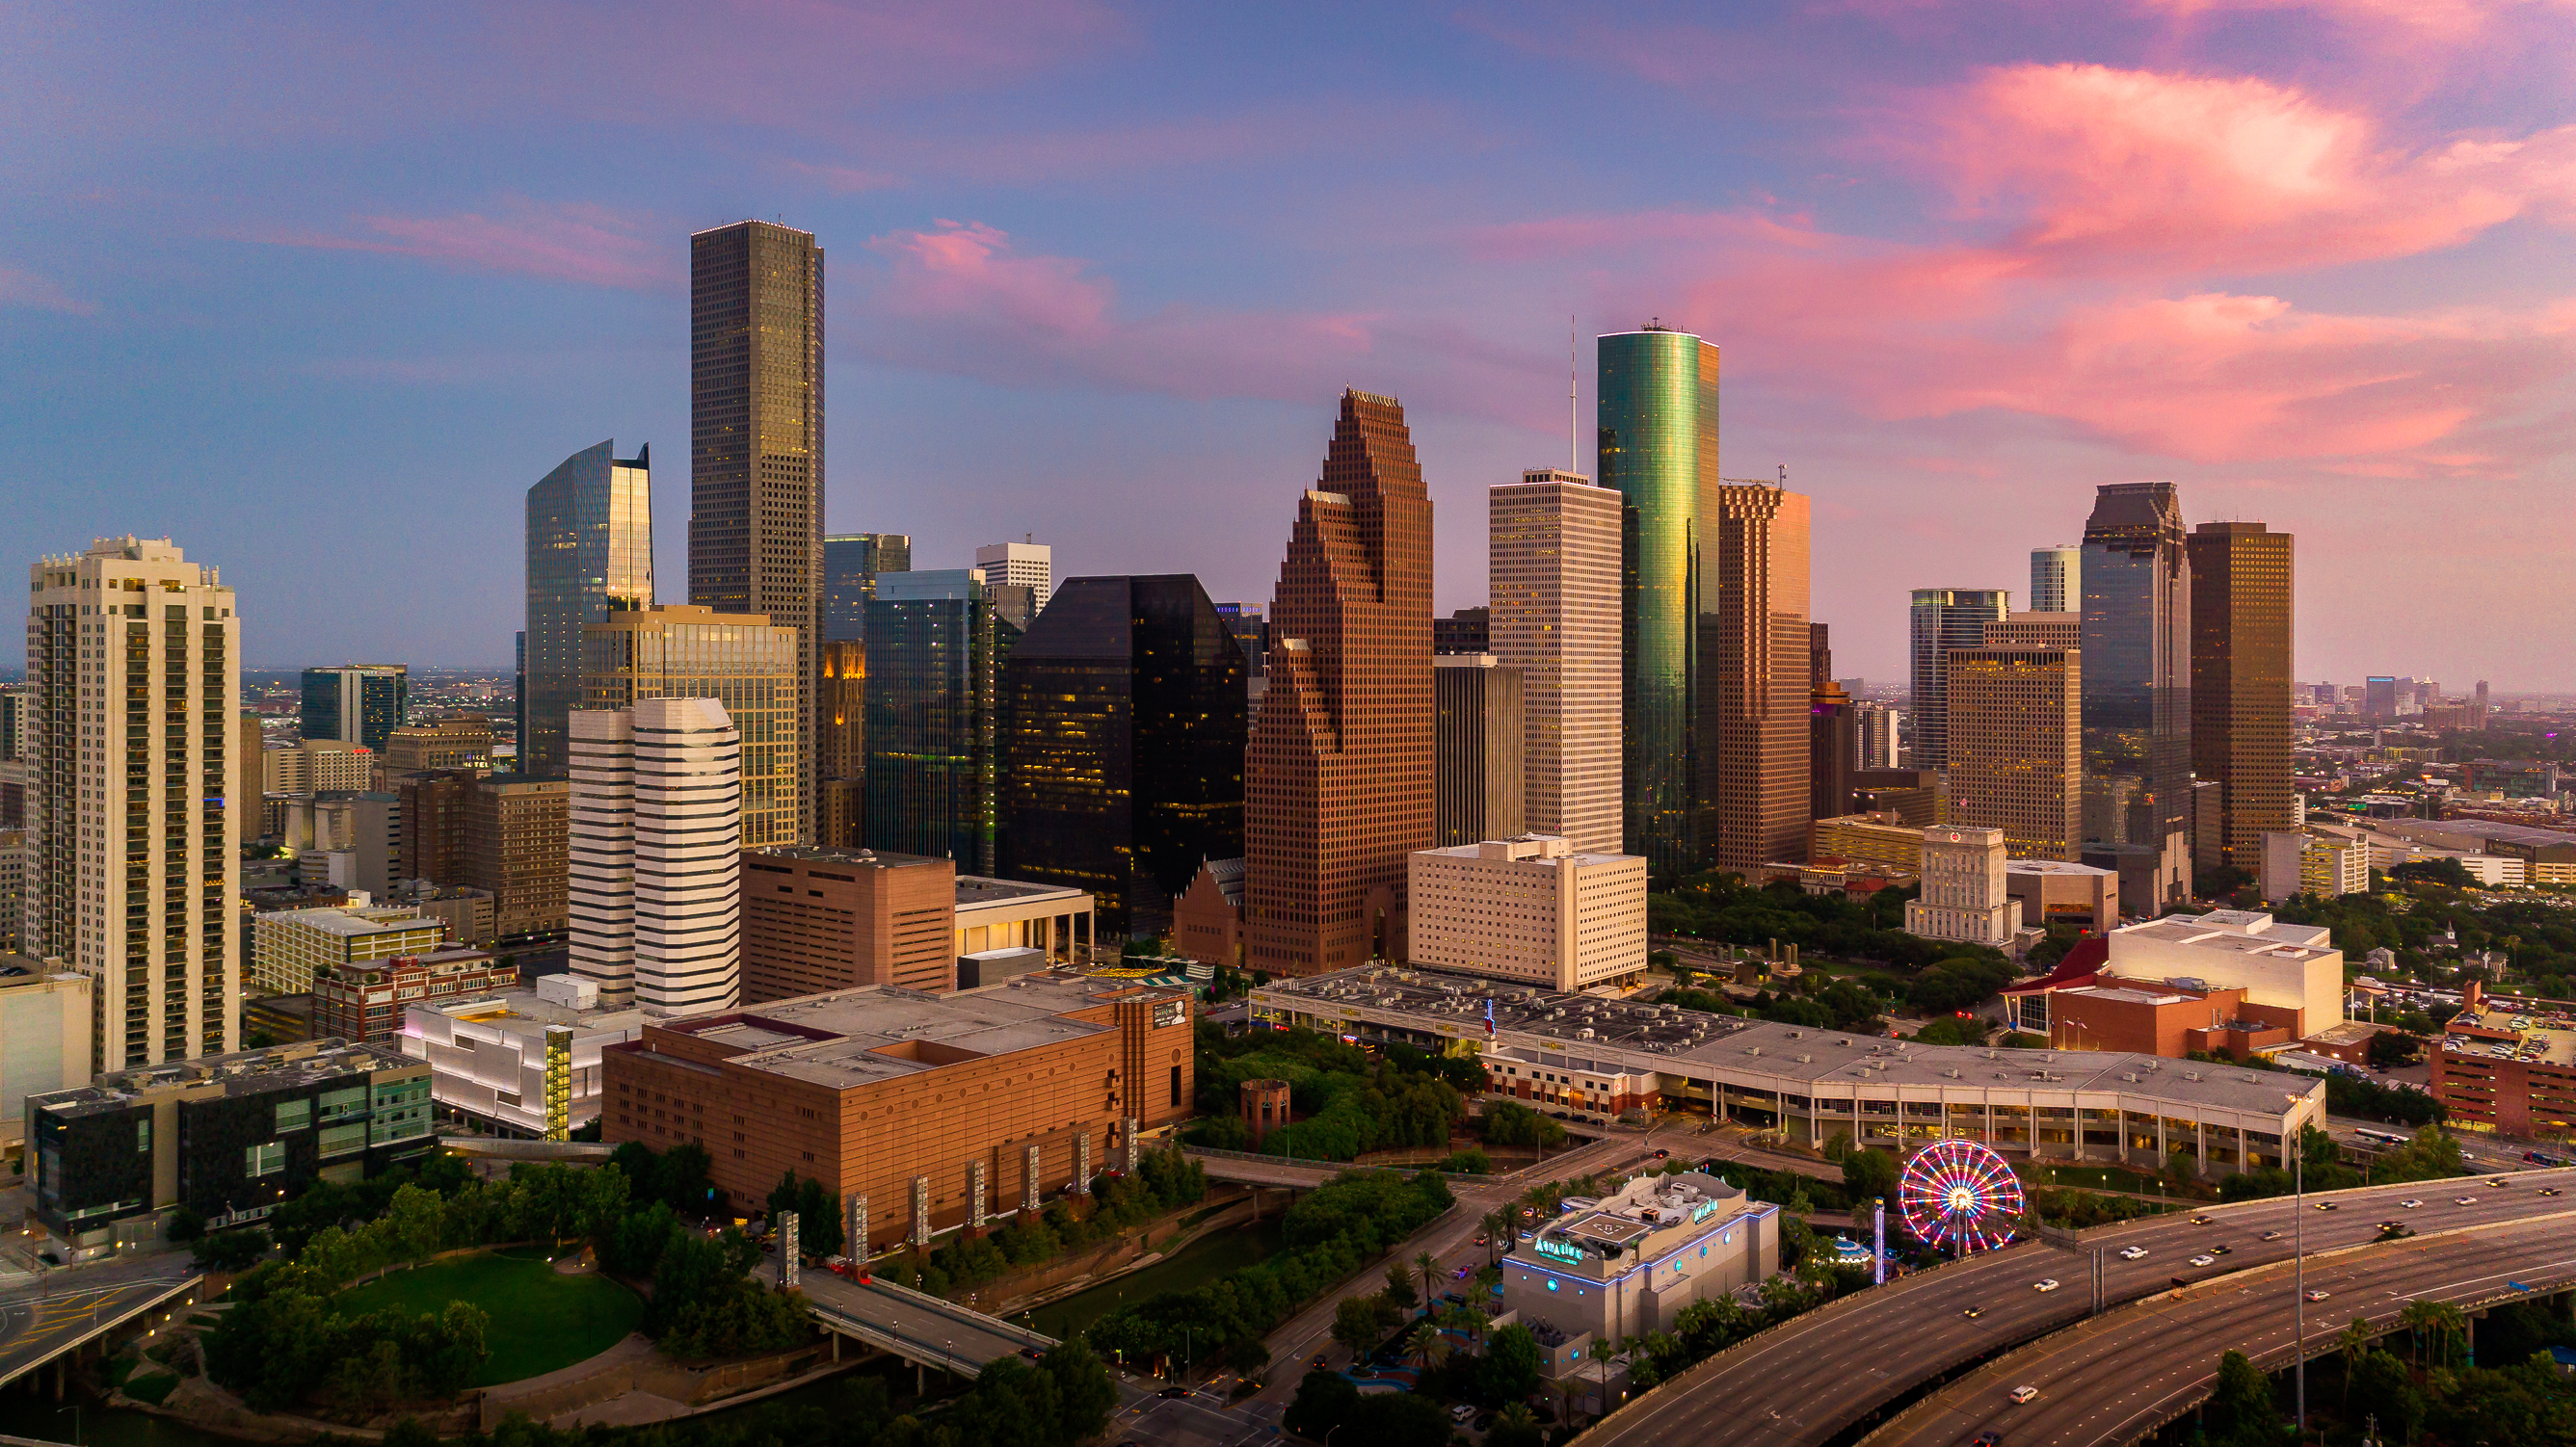 Downtown Houston saw new businesses emerge in 2020 despite the pandemic crisis.